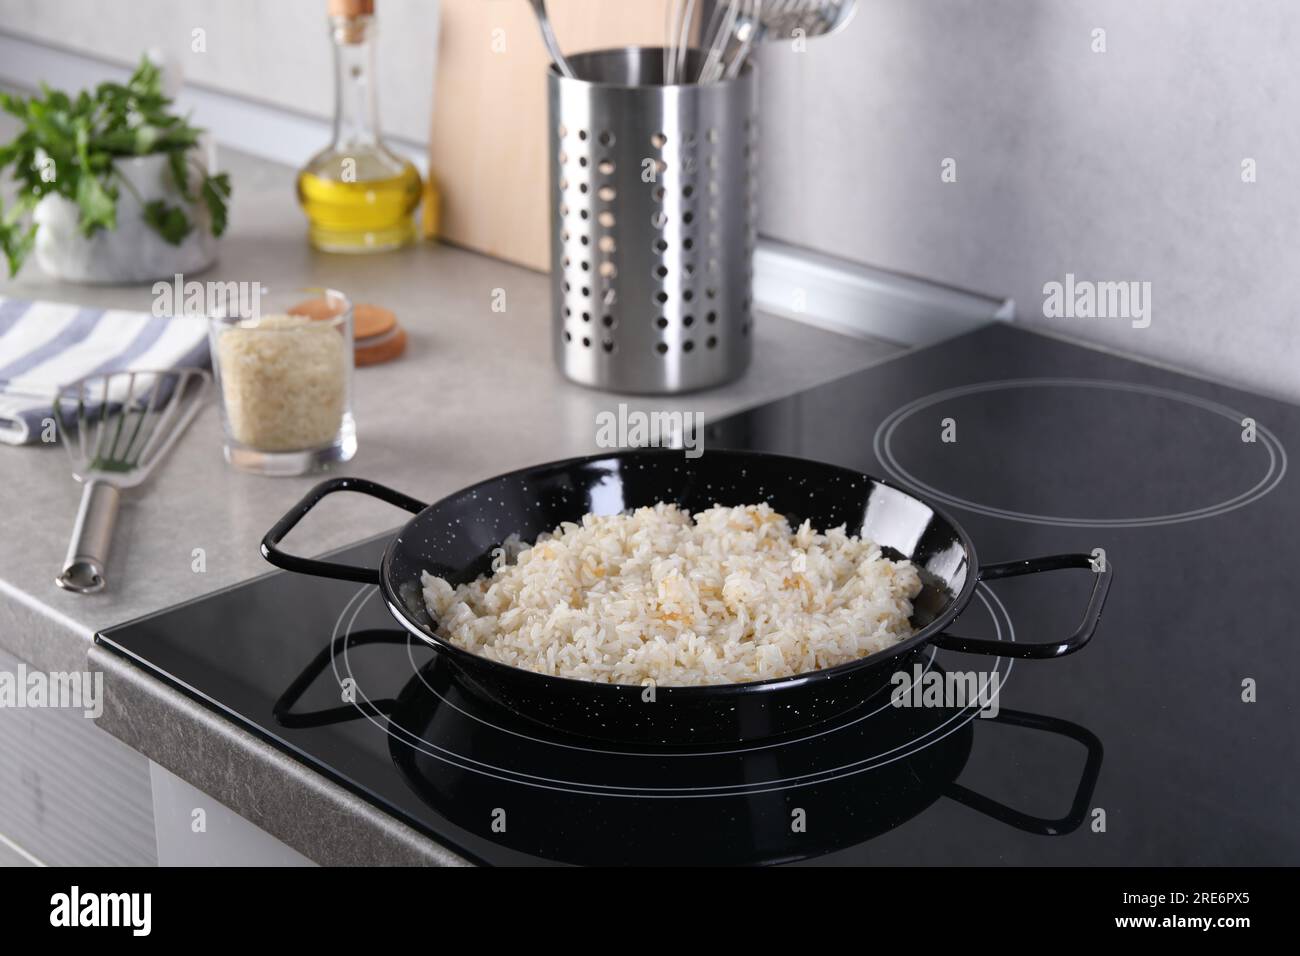 Cooking tasty rice on induction stove in kitchen Stock Photo - Alamy